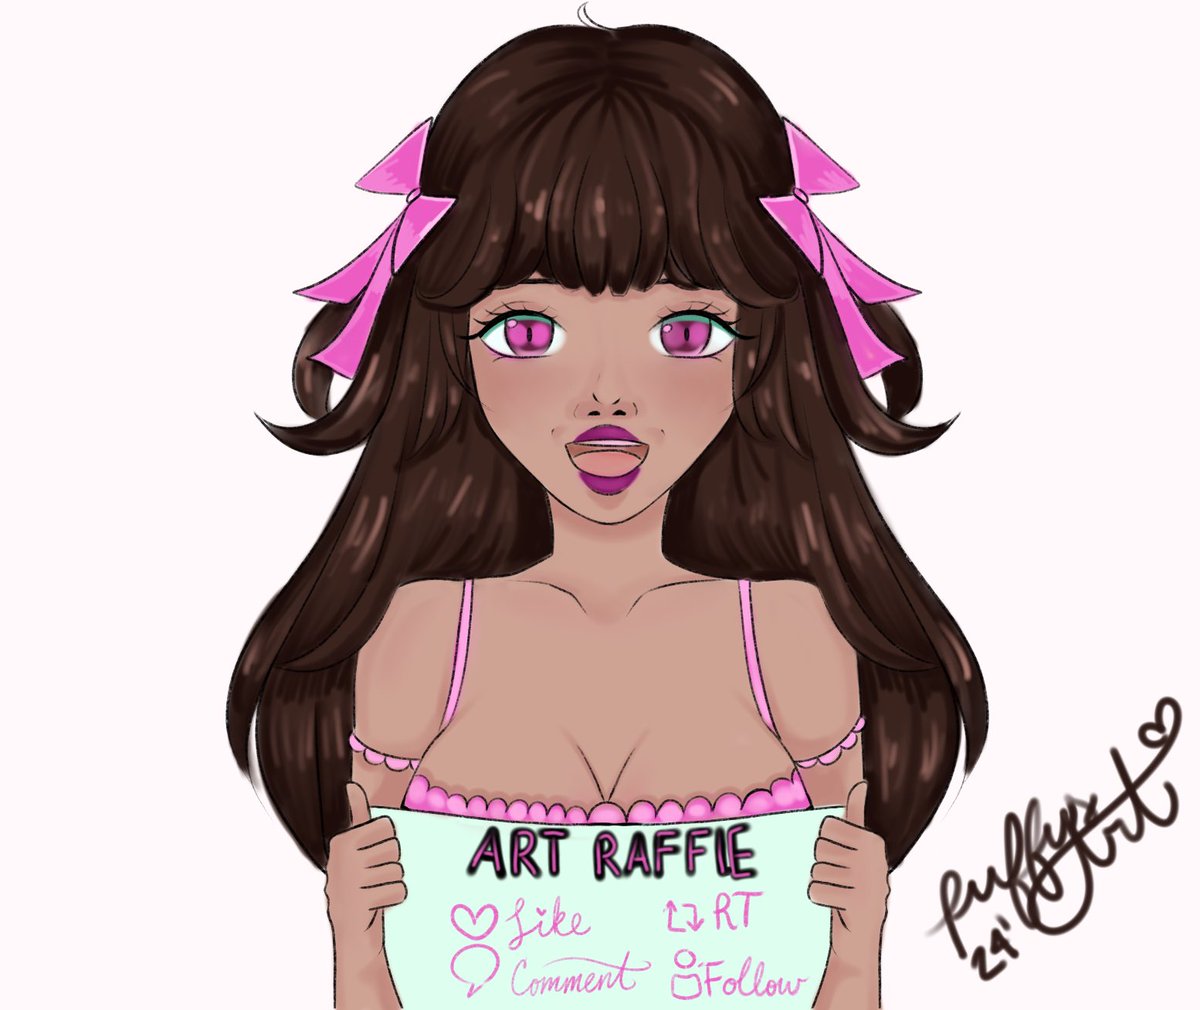 ♡﹒ ଘ thank you for all the support on here ଓ #artraffle #artgiveaway #artmoots